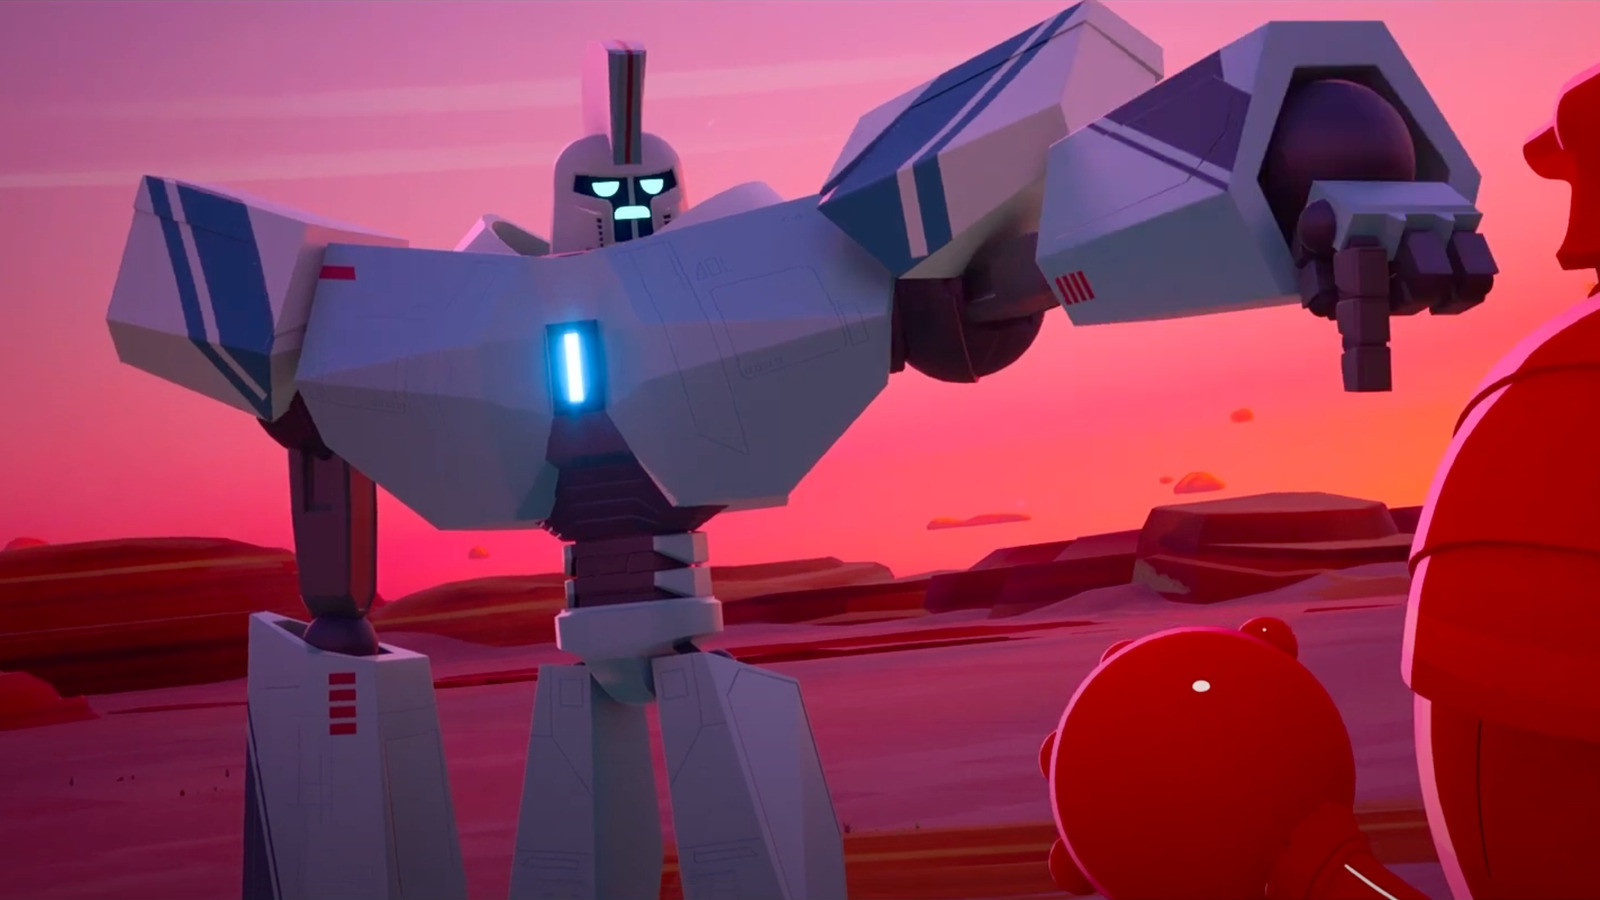 https://www.slashfilm.com/img/gallery/clips-round-up-netflixs-super-giant-robot-brothers-squabble-jim-gaffigan-gets-serious-in-collide-more-exclusive/l-intro-1659463572.jpg